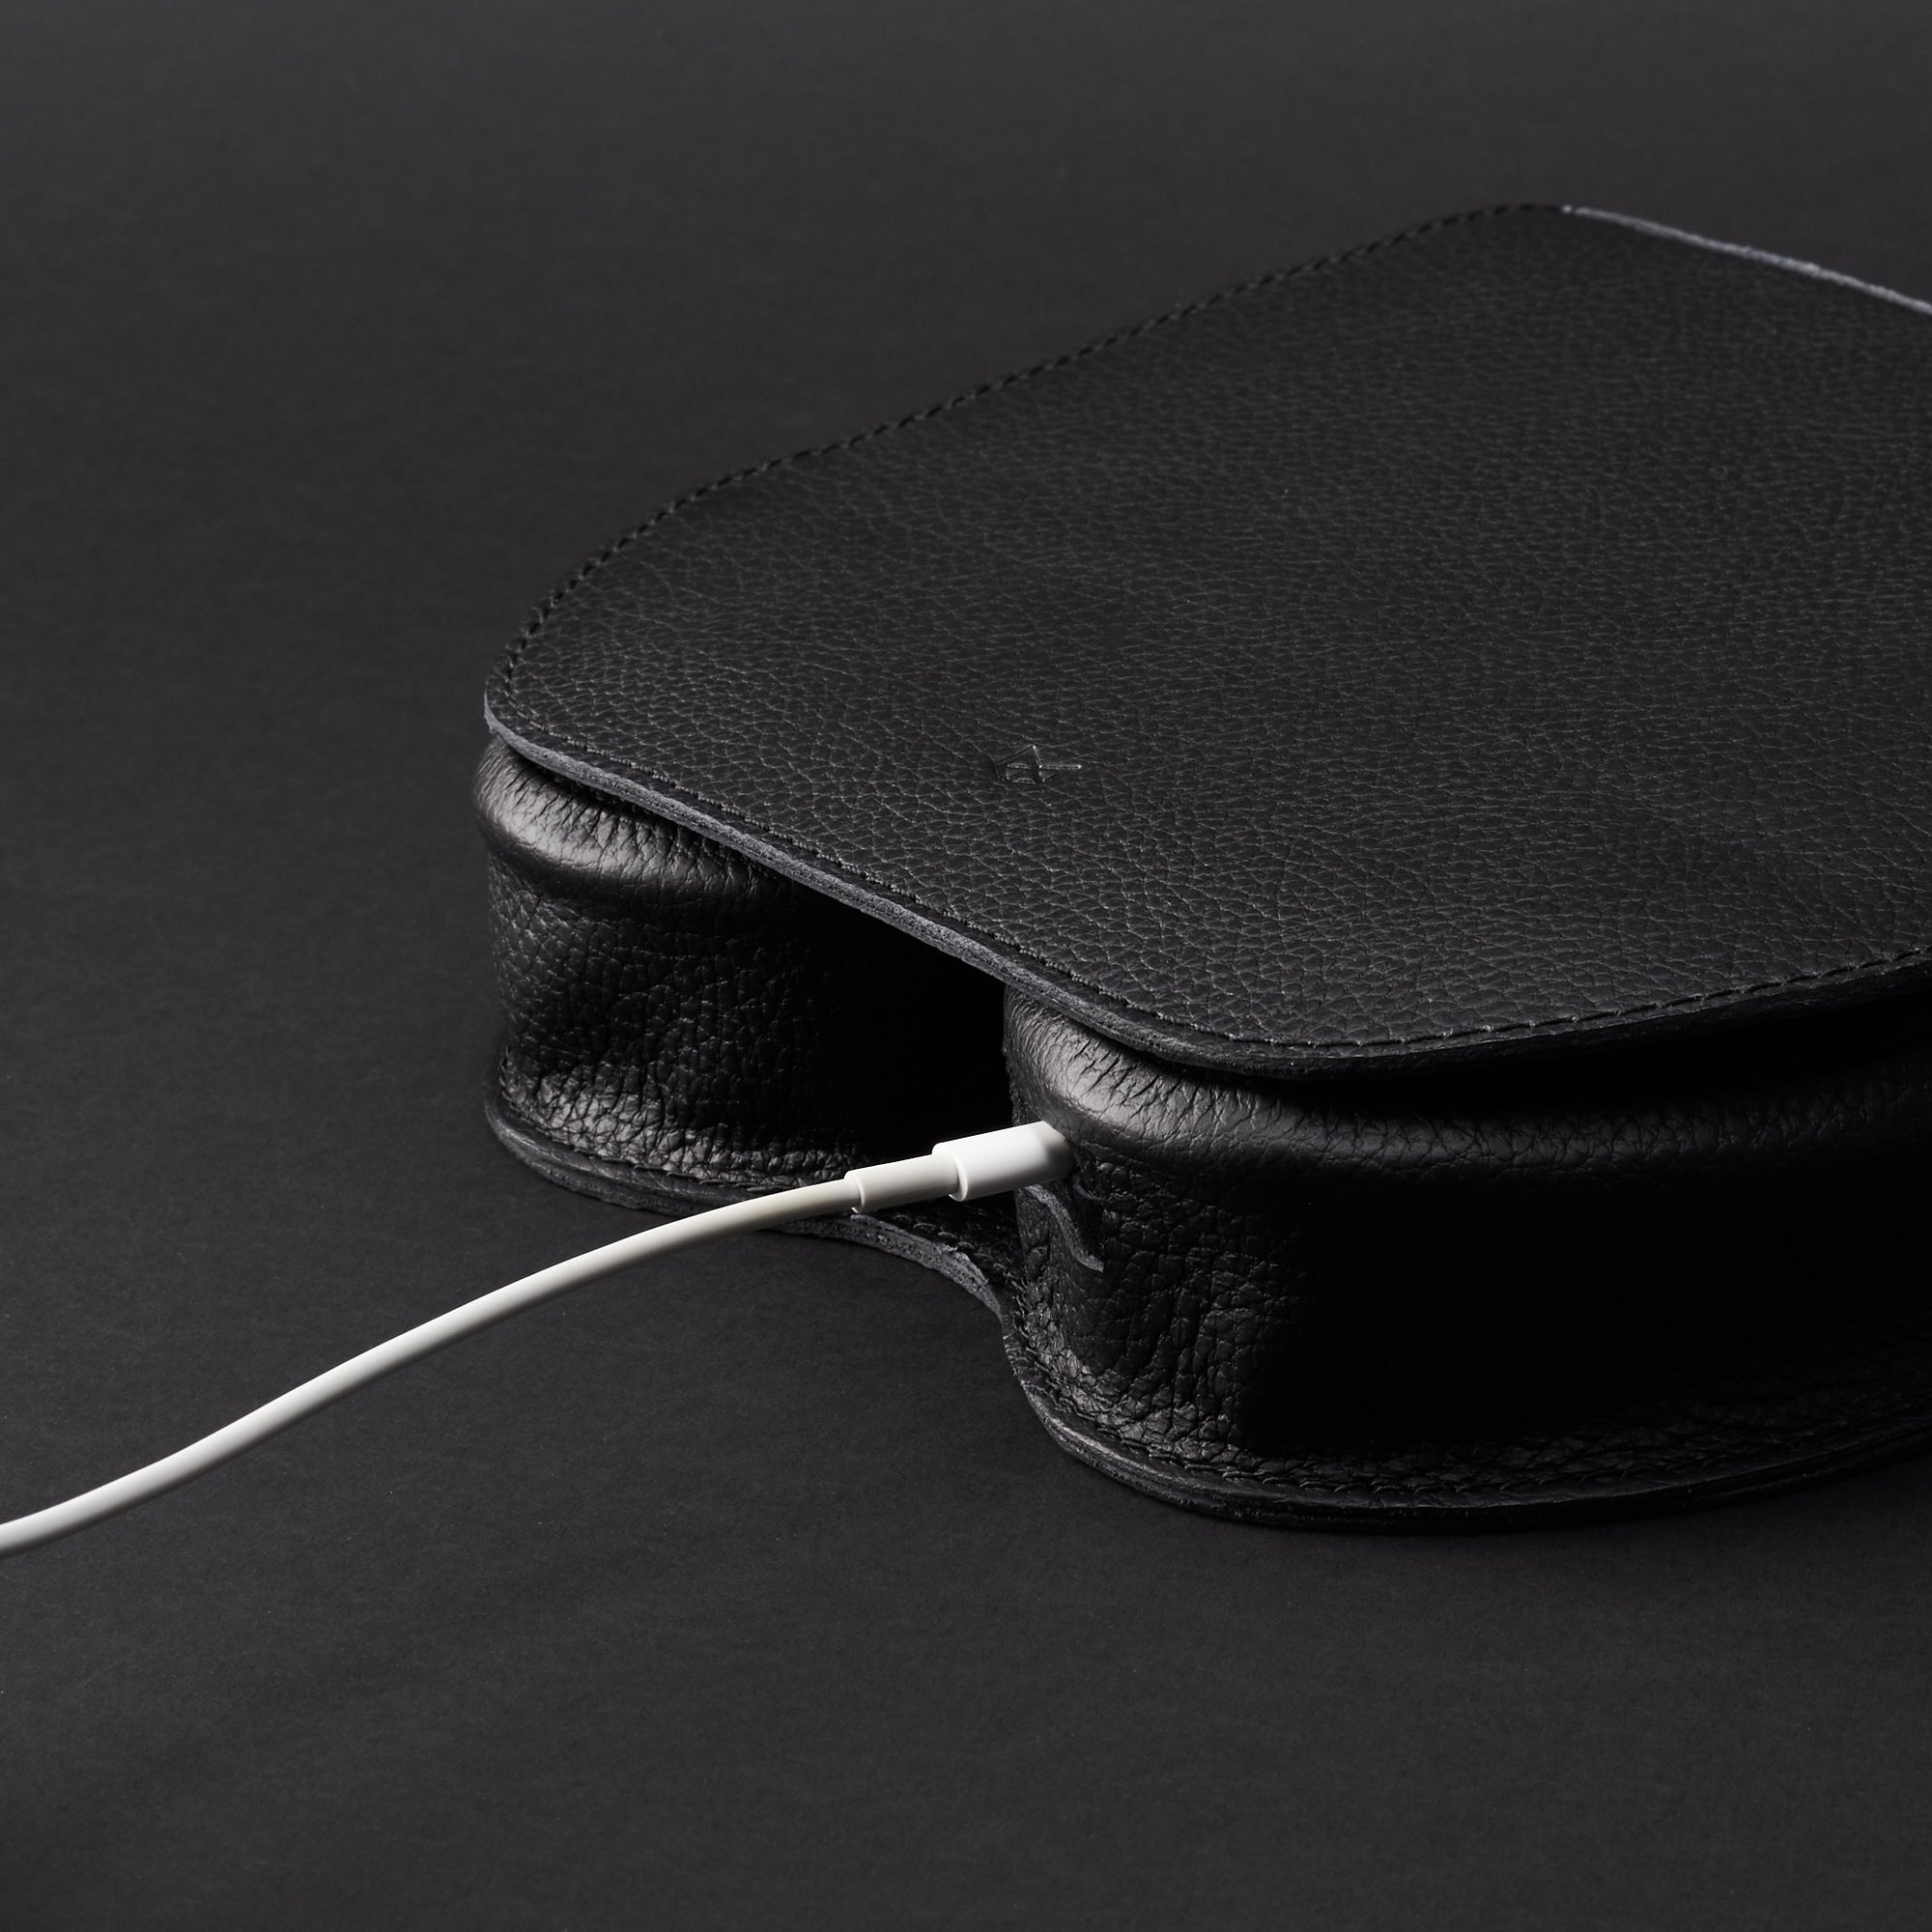 Cable hole for incase charging. AirPods Max Case Shield Black by Capra Leather